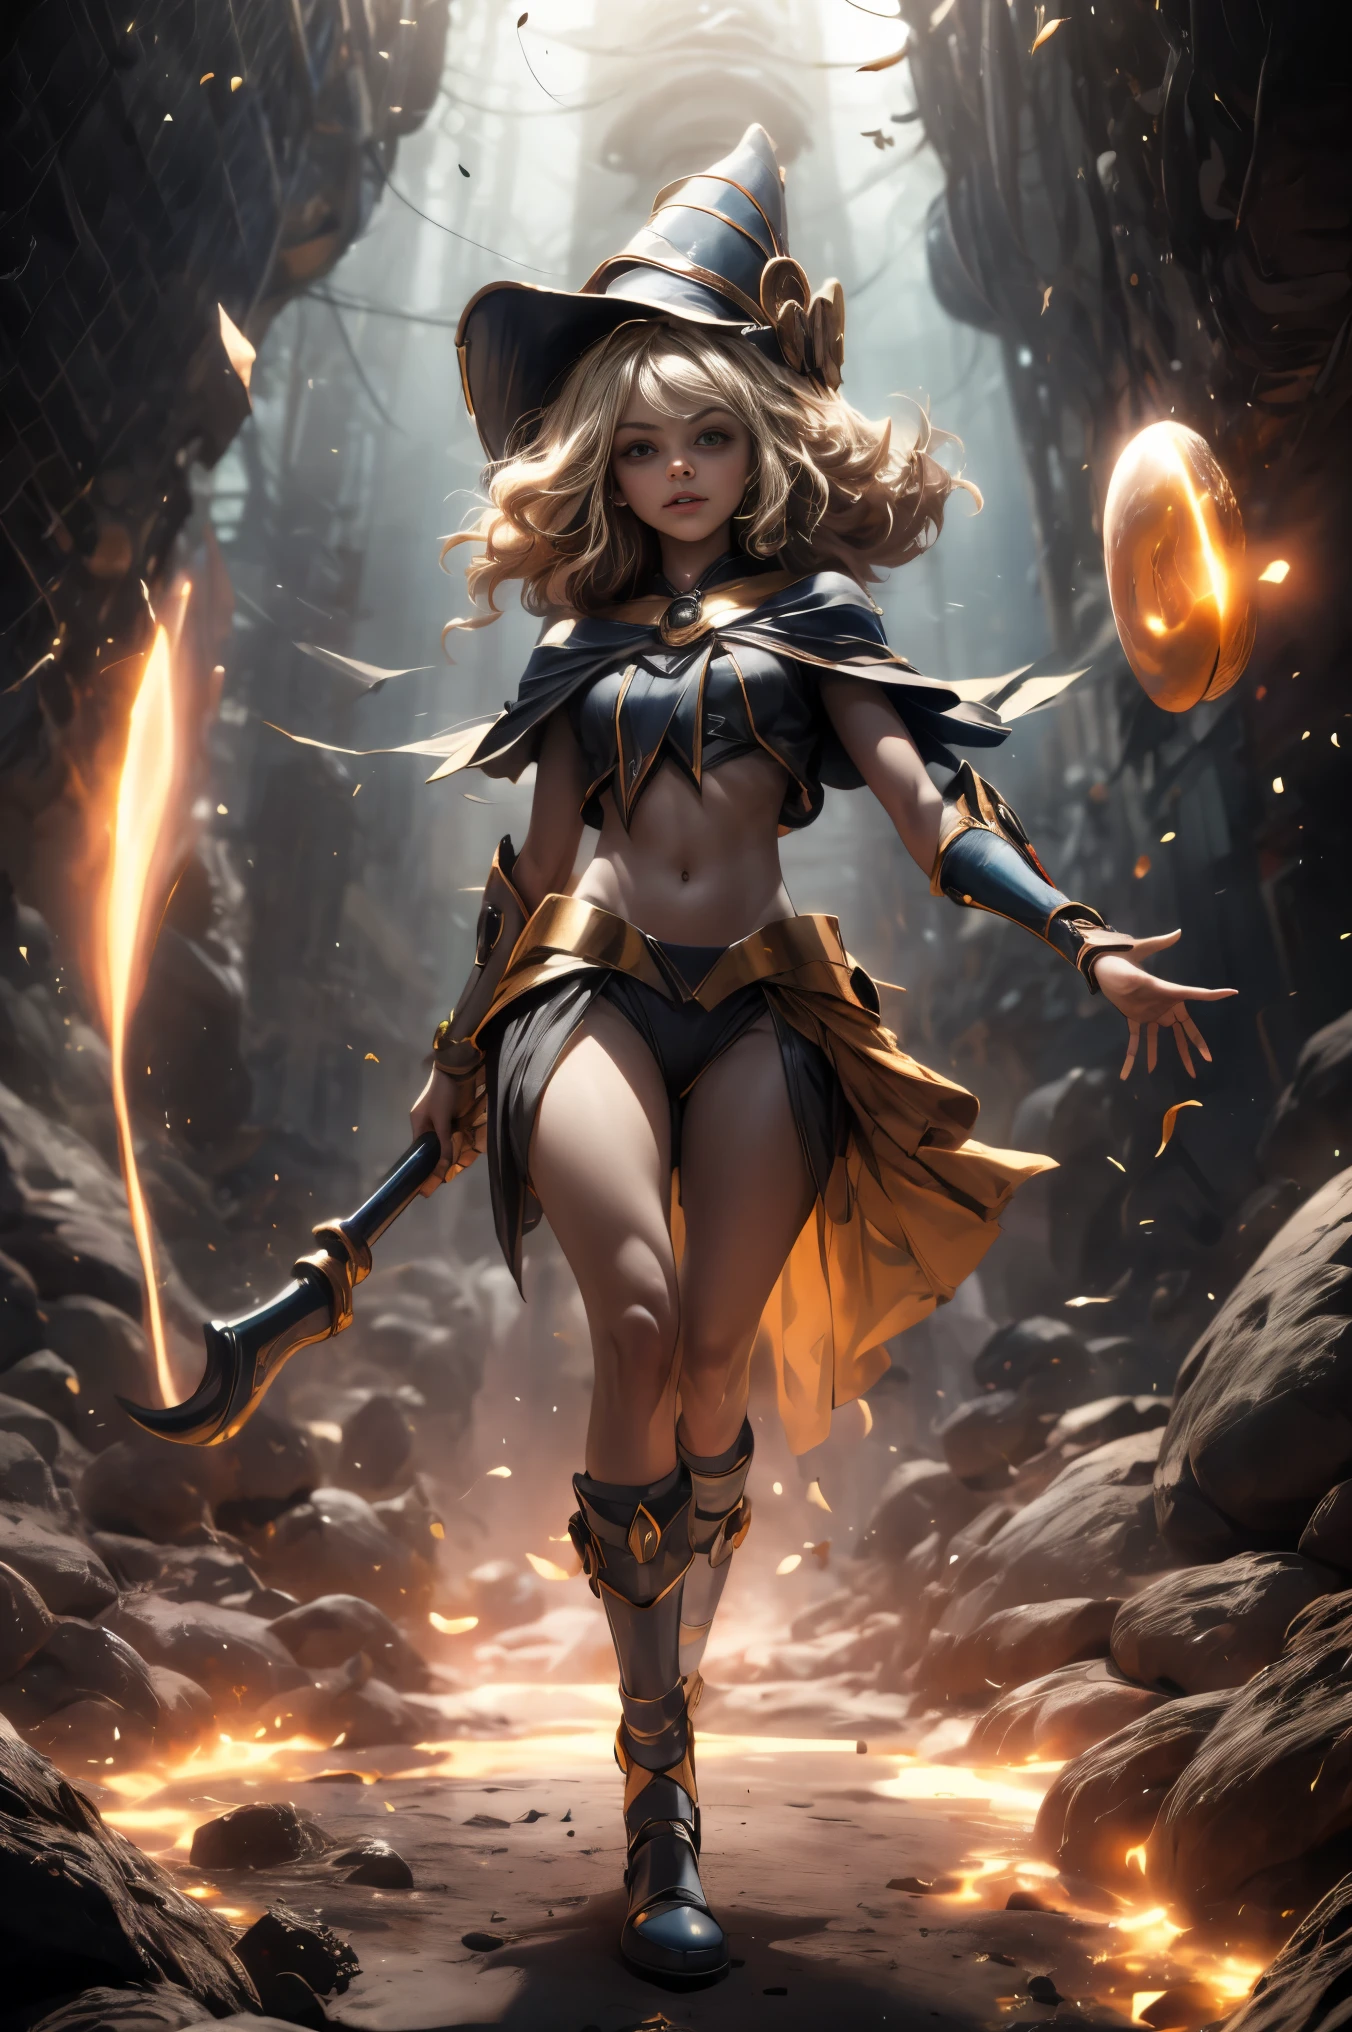 (8k,photorealistic　Raw photography　highest qualityr;1.4) 　(1girl in)　super beauty　(realistic face)　femenine body 　(Blonde with long curls)　Hold a black and red magic wand　combat scene　Magic hat with black and gold exterior　Beautiful expression　Glare　(Real looking skin)　(Giles dark wizards)　Tempting　super high resolution　A hyperrealist　high detail　Full body photo　remains